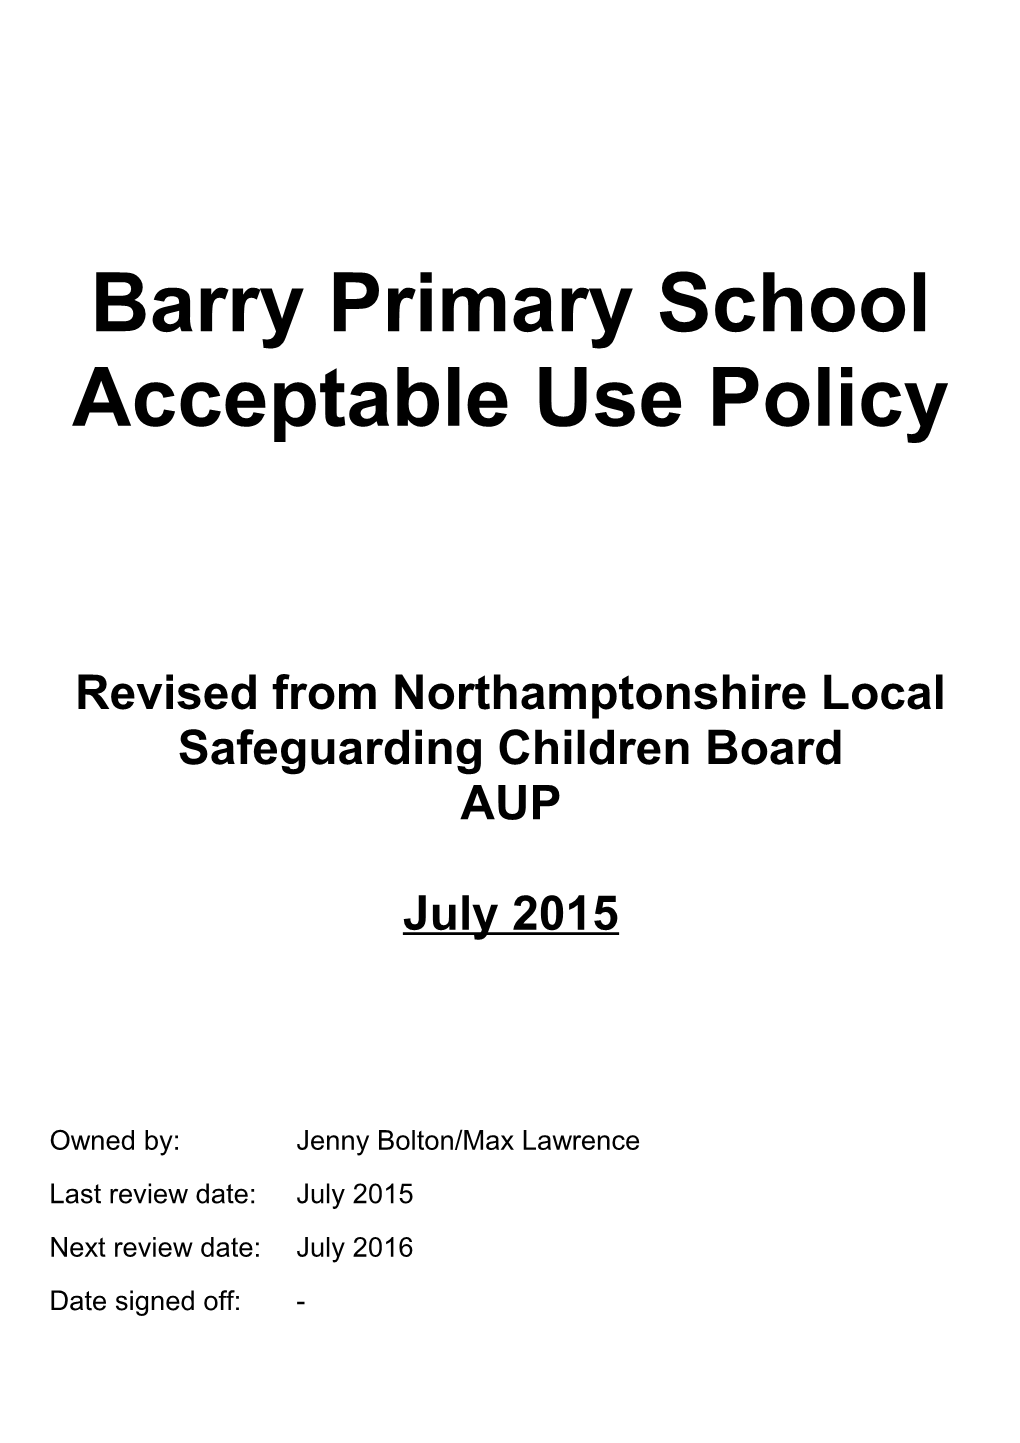 Revised from Northamptonshire Local Safeguarding Children Board